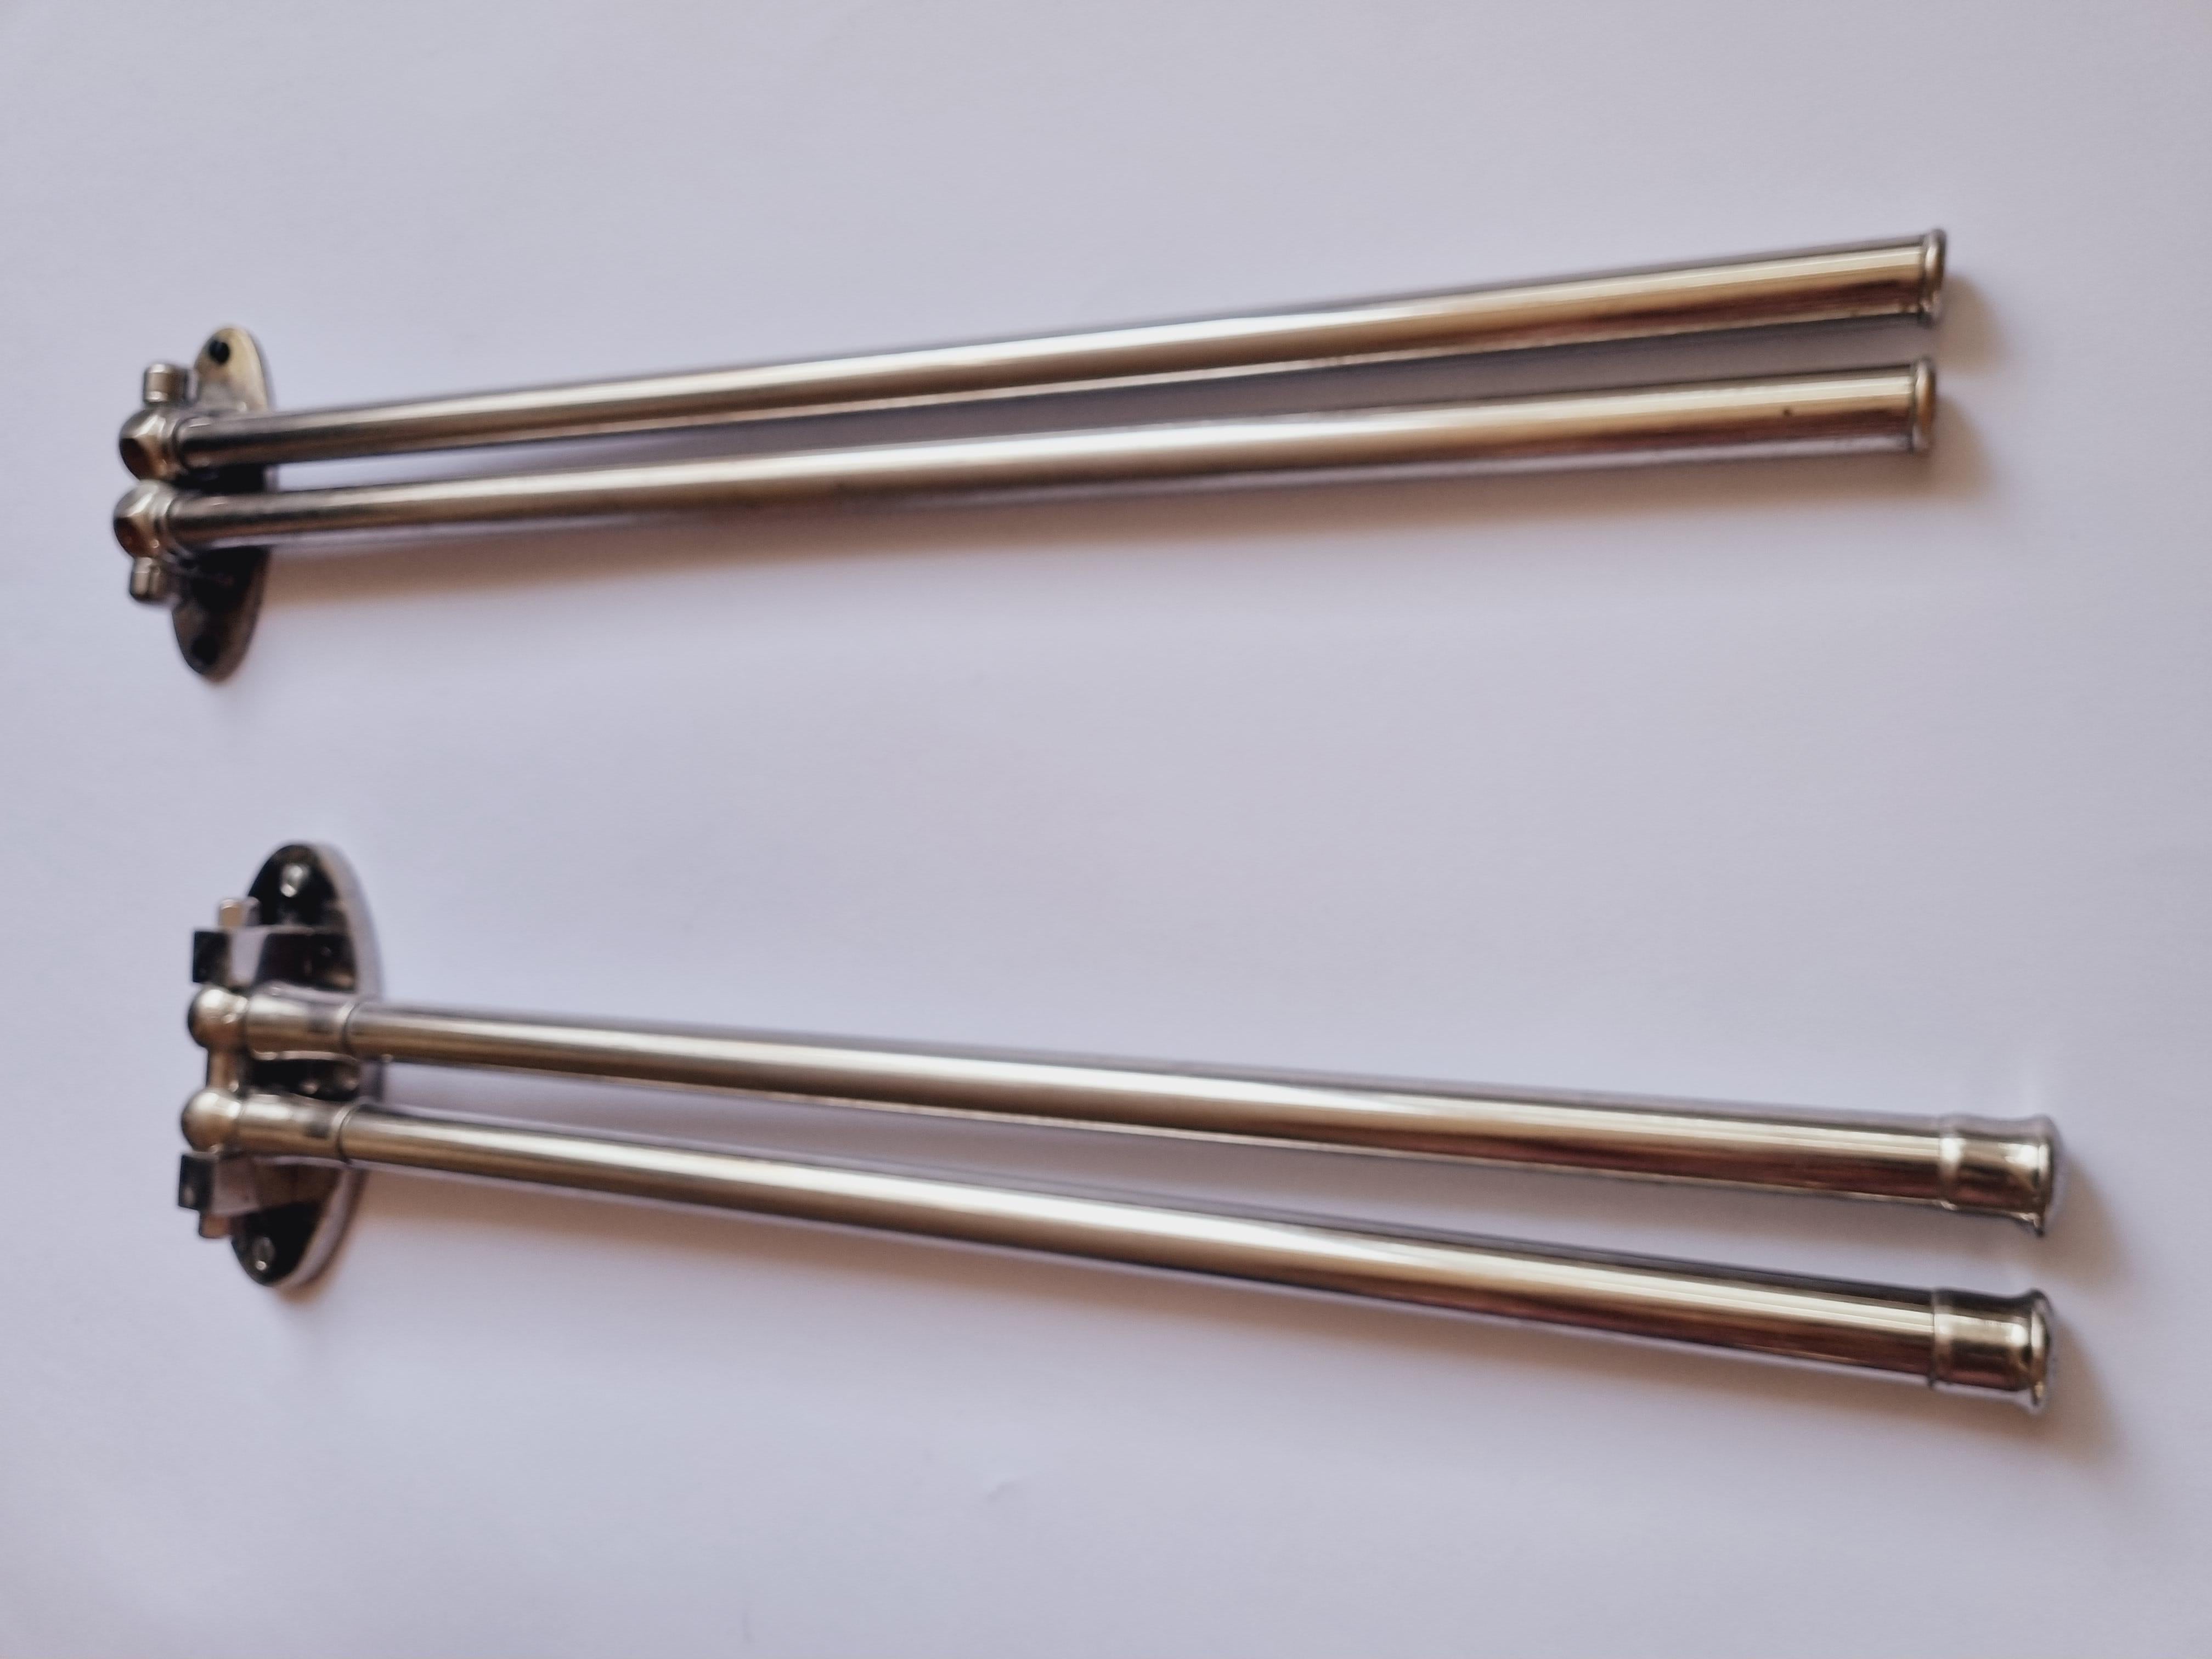 Set of Two Functionalism, Art Deco Chrome Towel Holders, 1930s For Sale 5